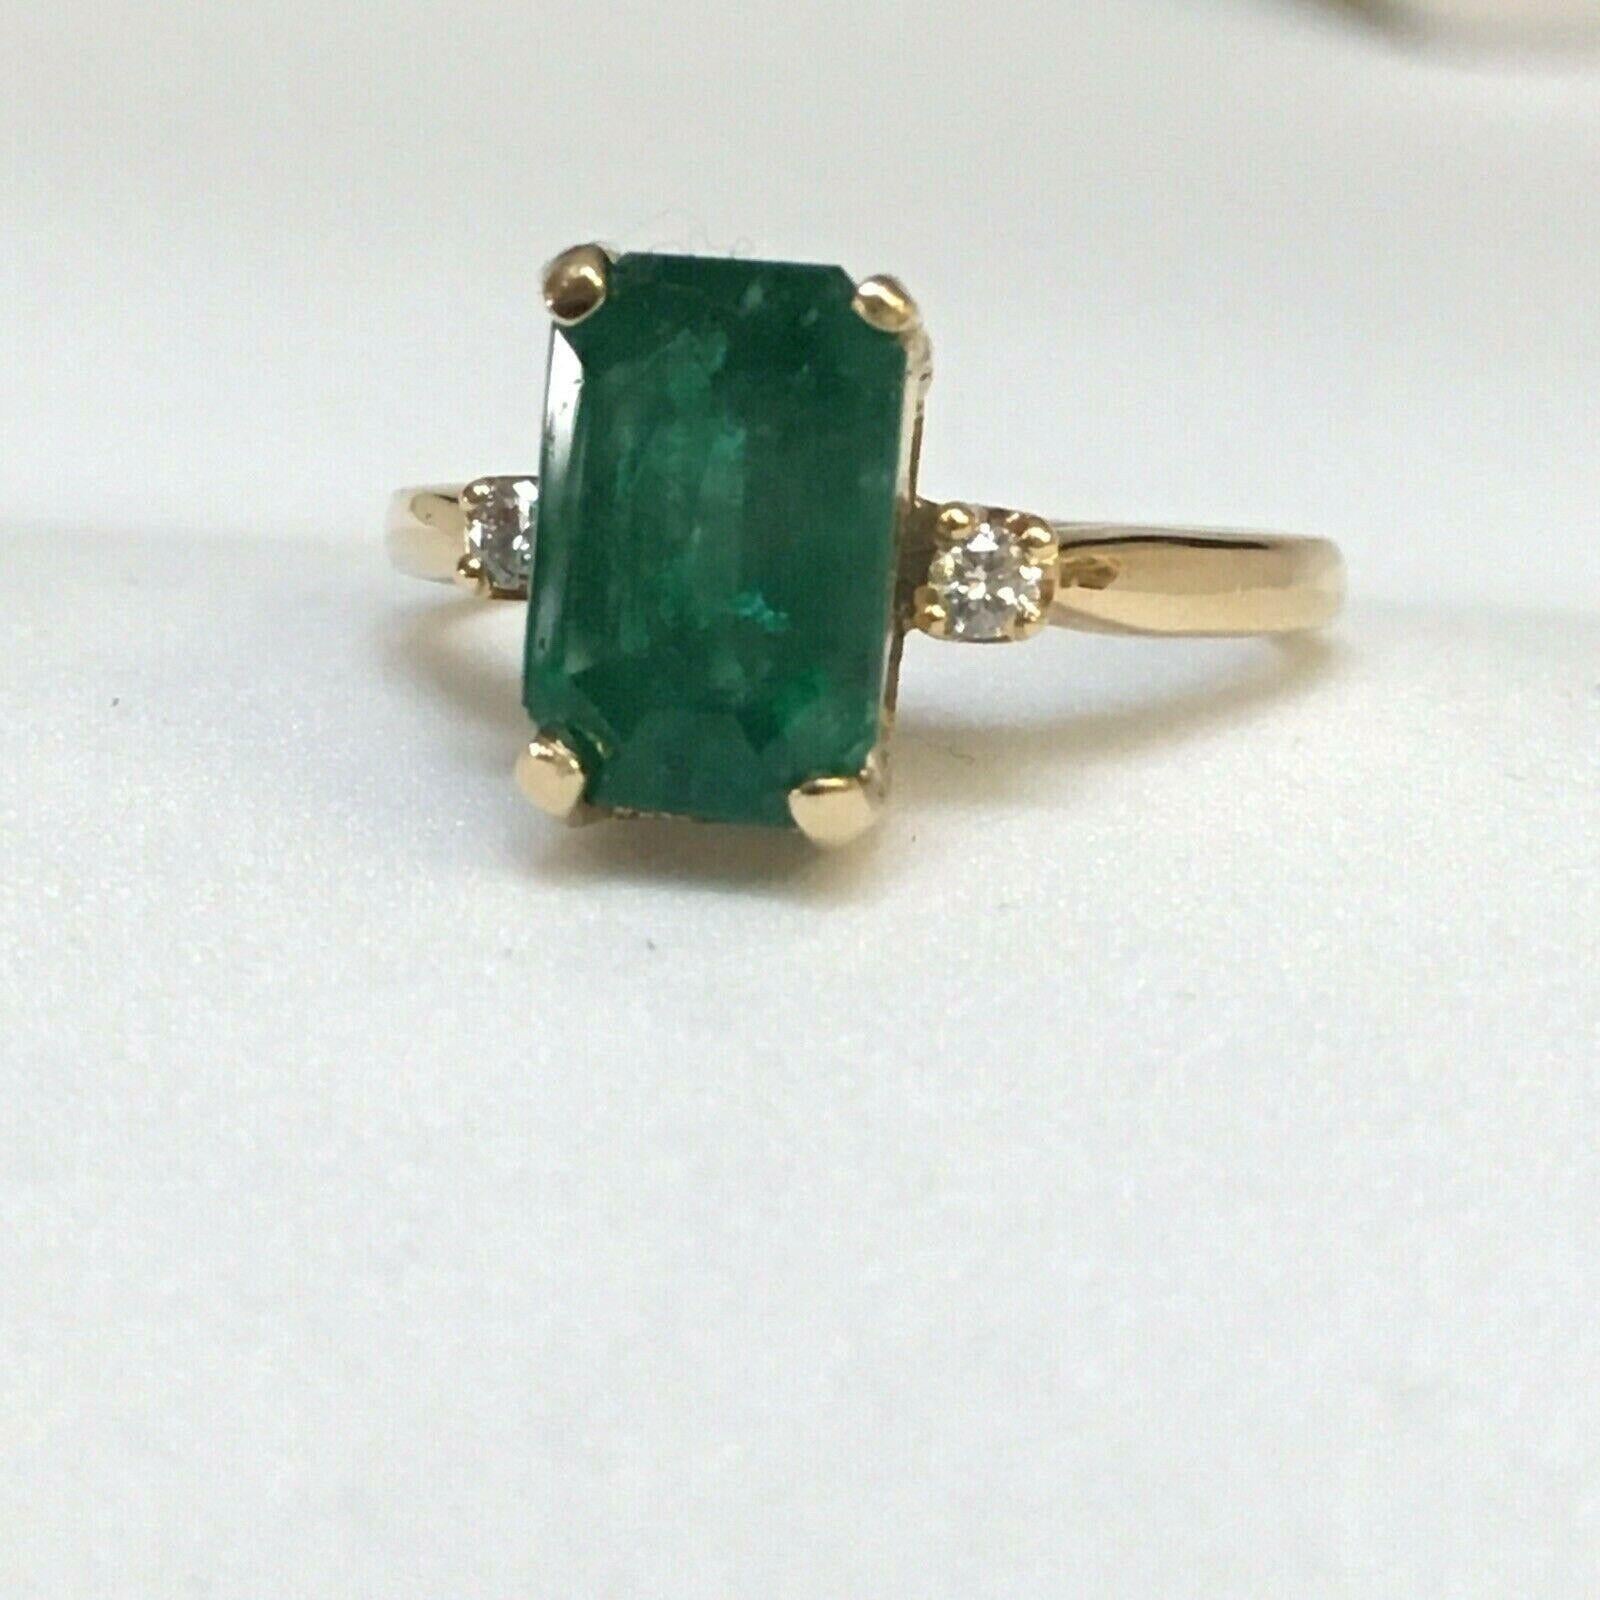 2.25 Carat Natural Emerald 14K Gold Diamond Ring     

Size 7.25
Weighing 3.5 gram
In excellent condition new without tags 
Natural Emerald 10X6.7X4.8 mm approximately 2.25 Carat 
Two round Full Cut Diamonds .04 Carat Total Weight 
Marked, tested